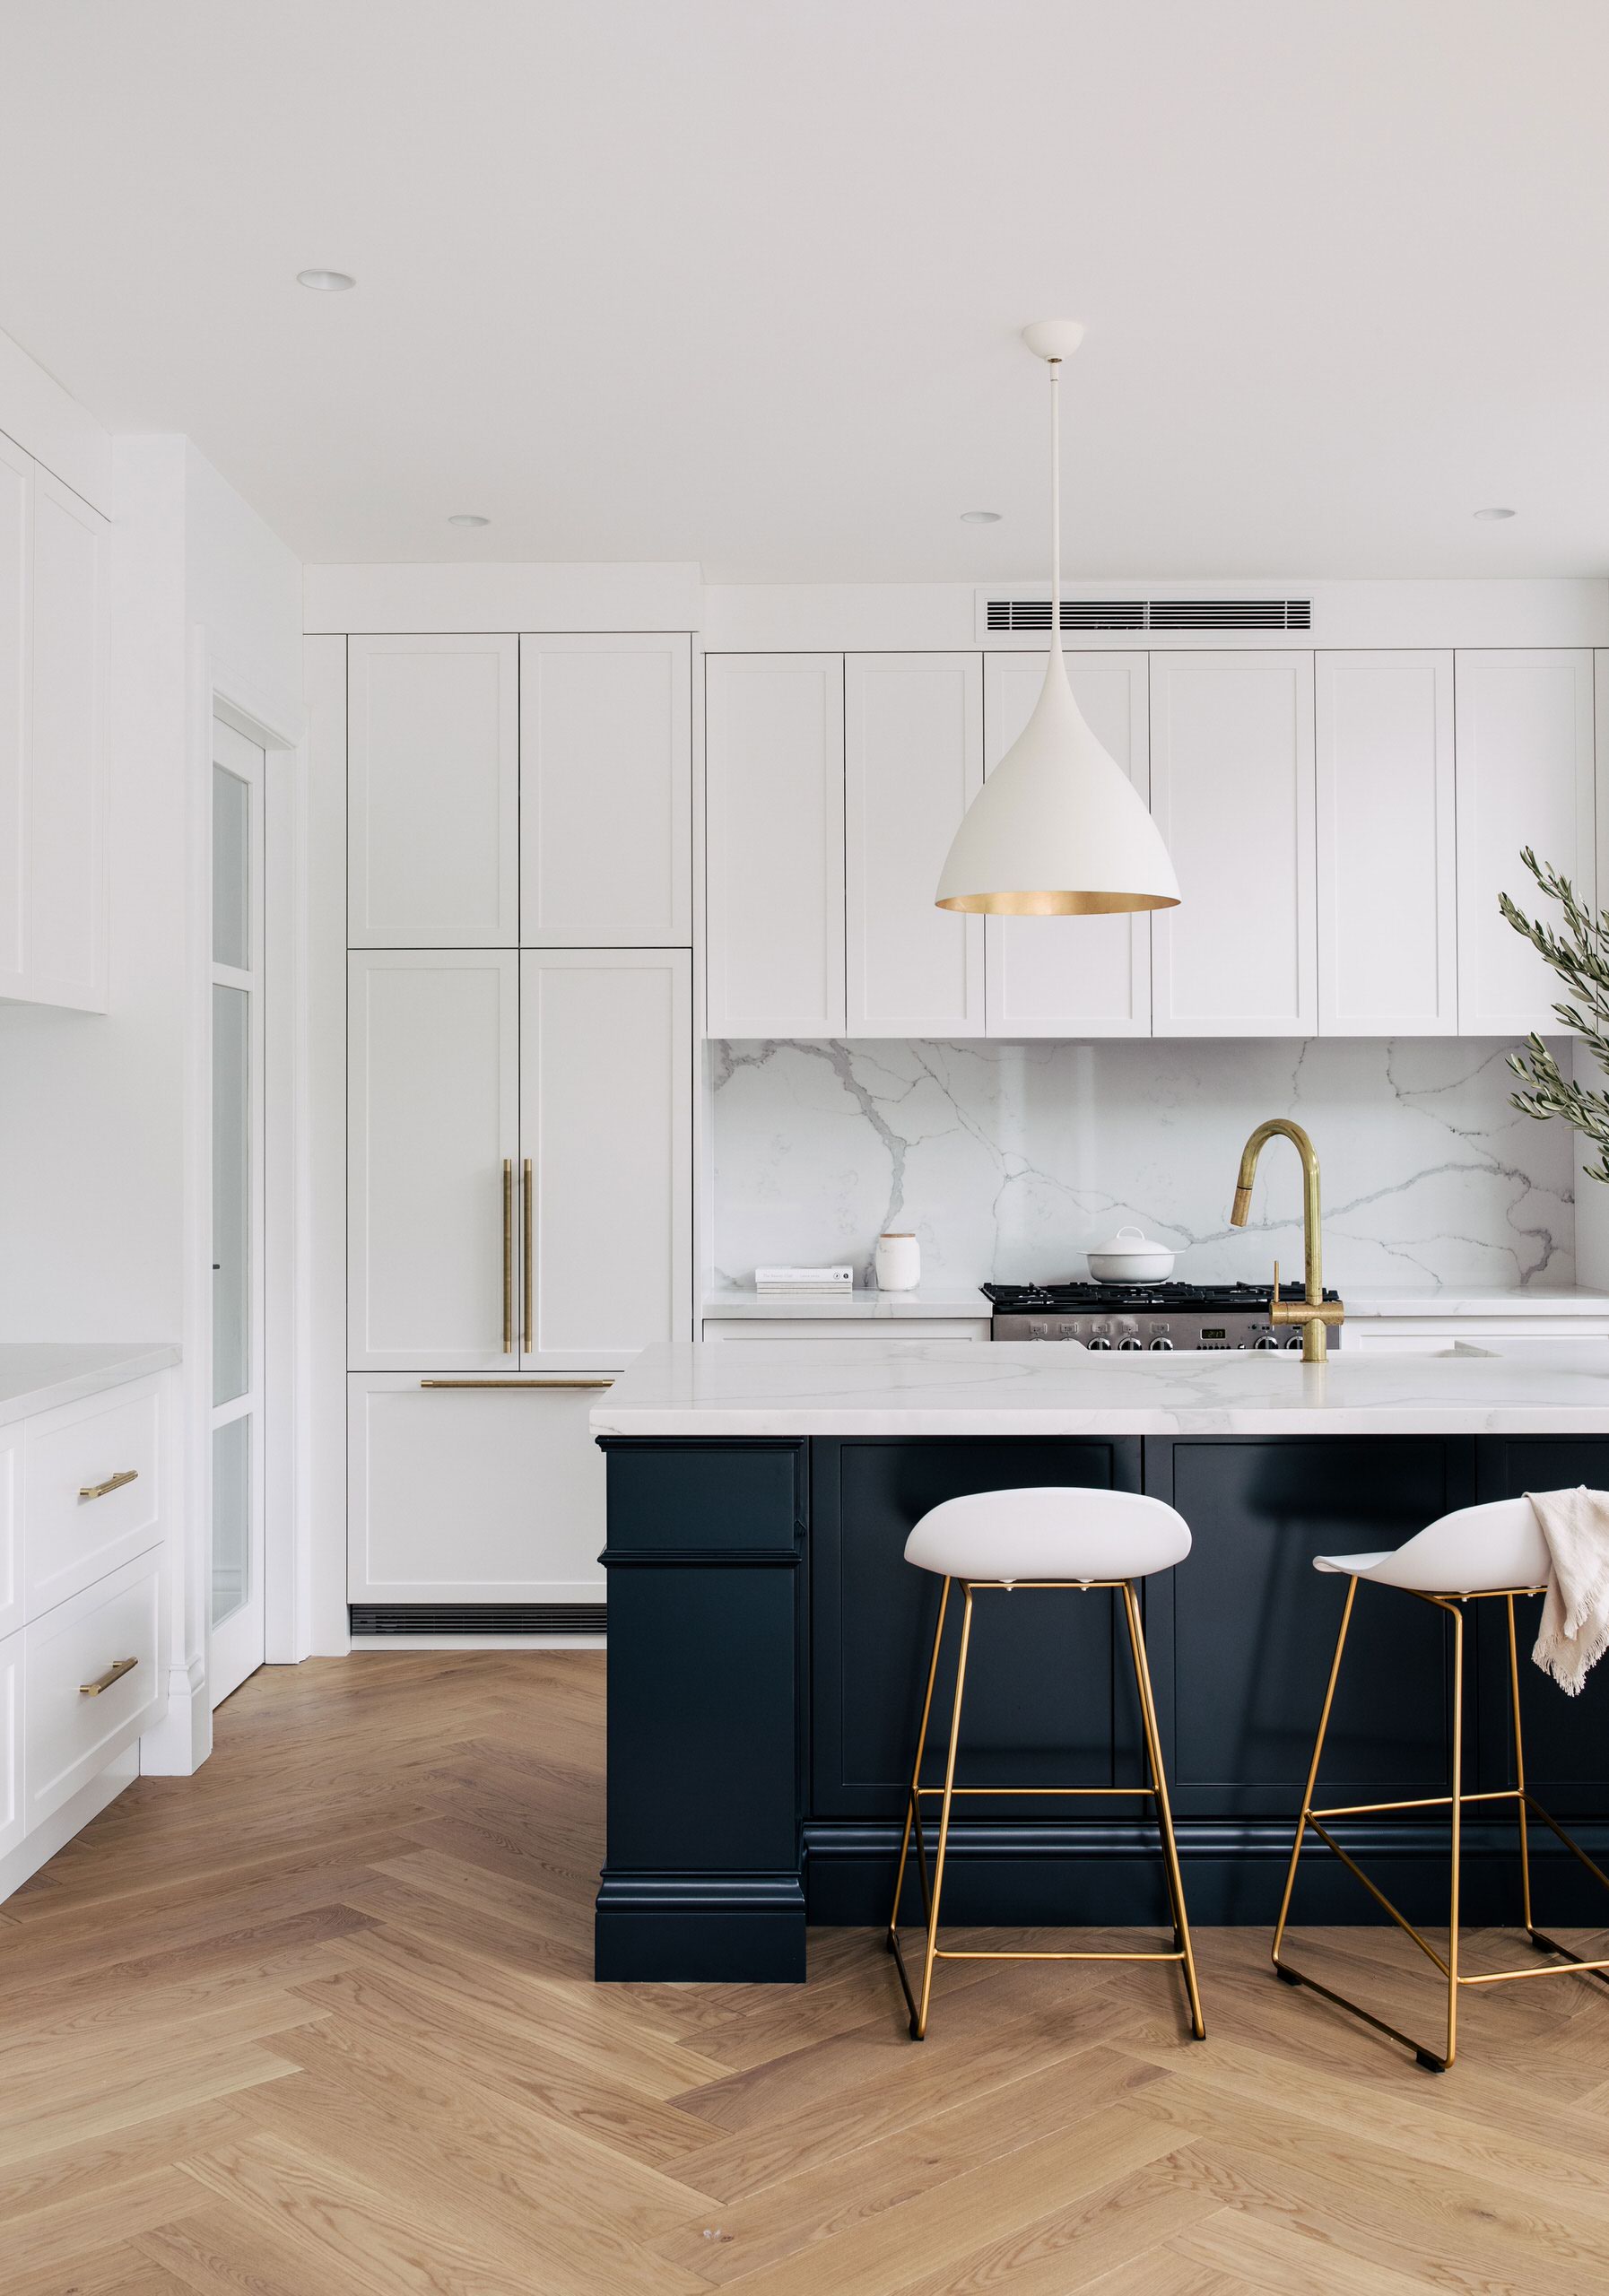 20 Statement Backsplashes That Add A Dose Of Drama To The Kitchen - Luxe  Interiors + Design